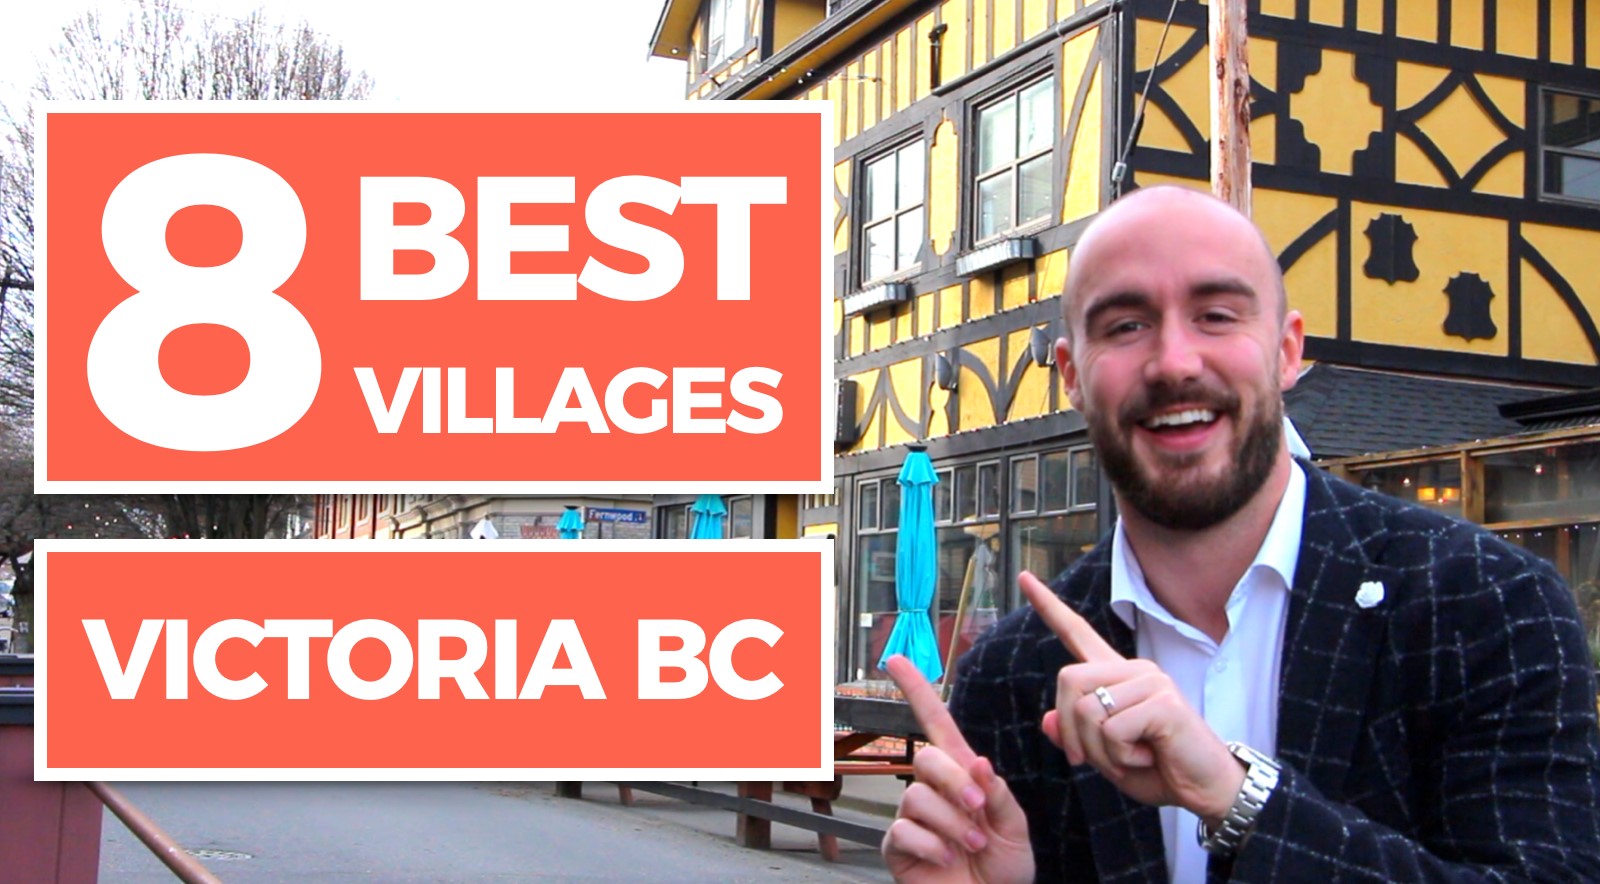 The Eight best villages in victoria bc